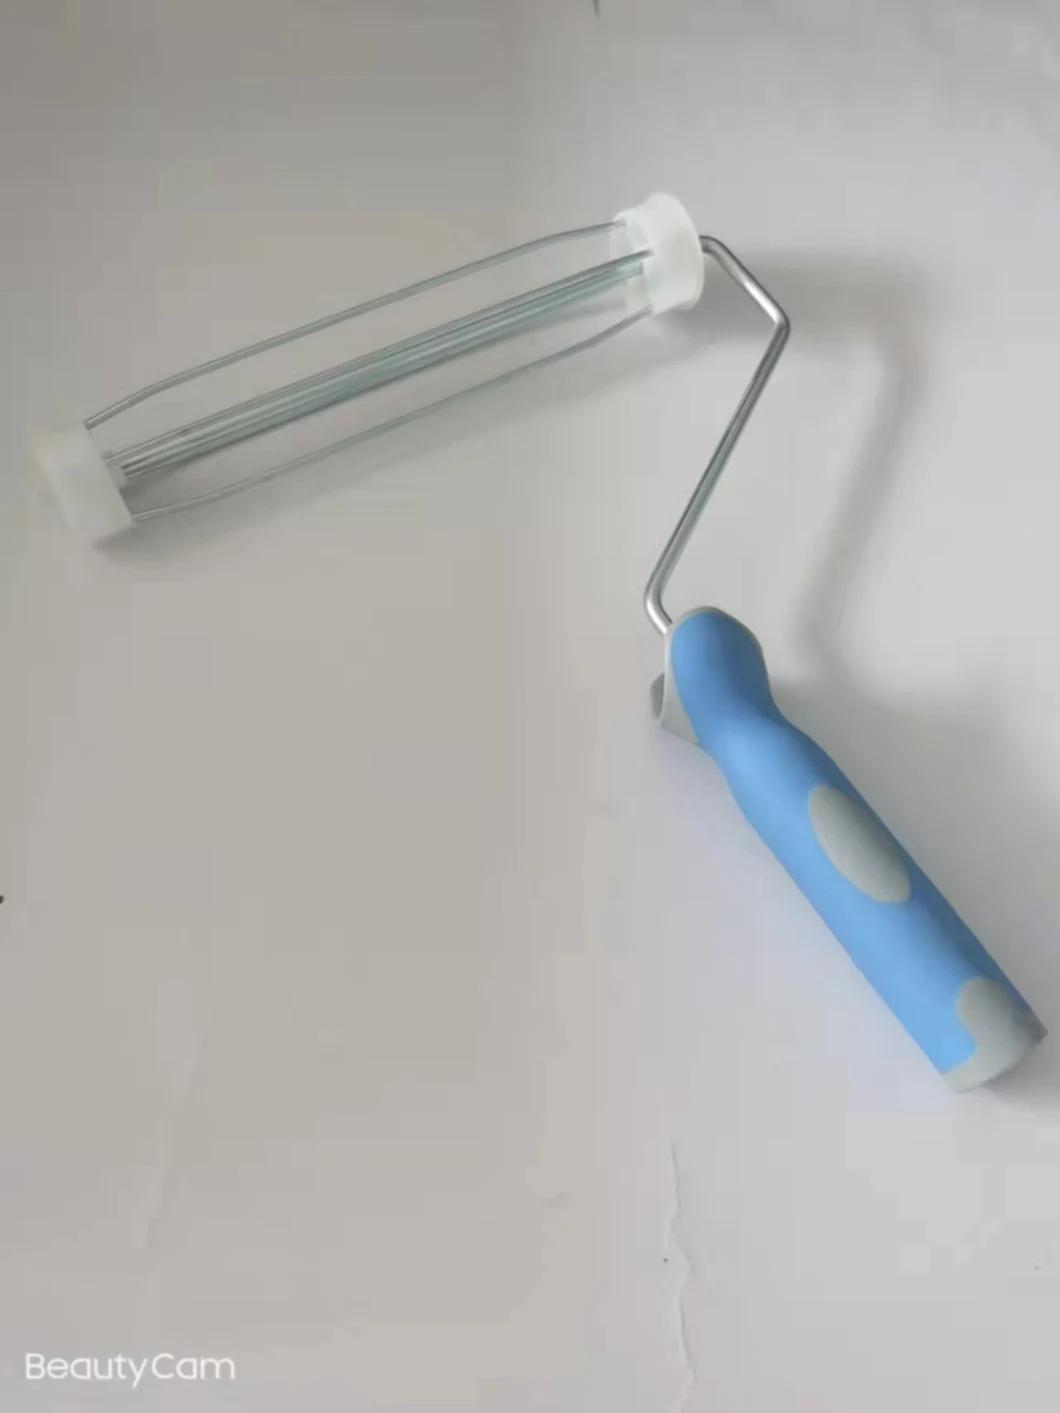 Aluminum Frame with Rubber Handle